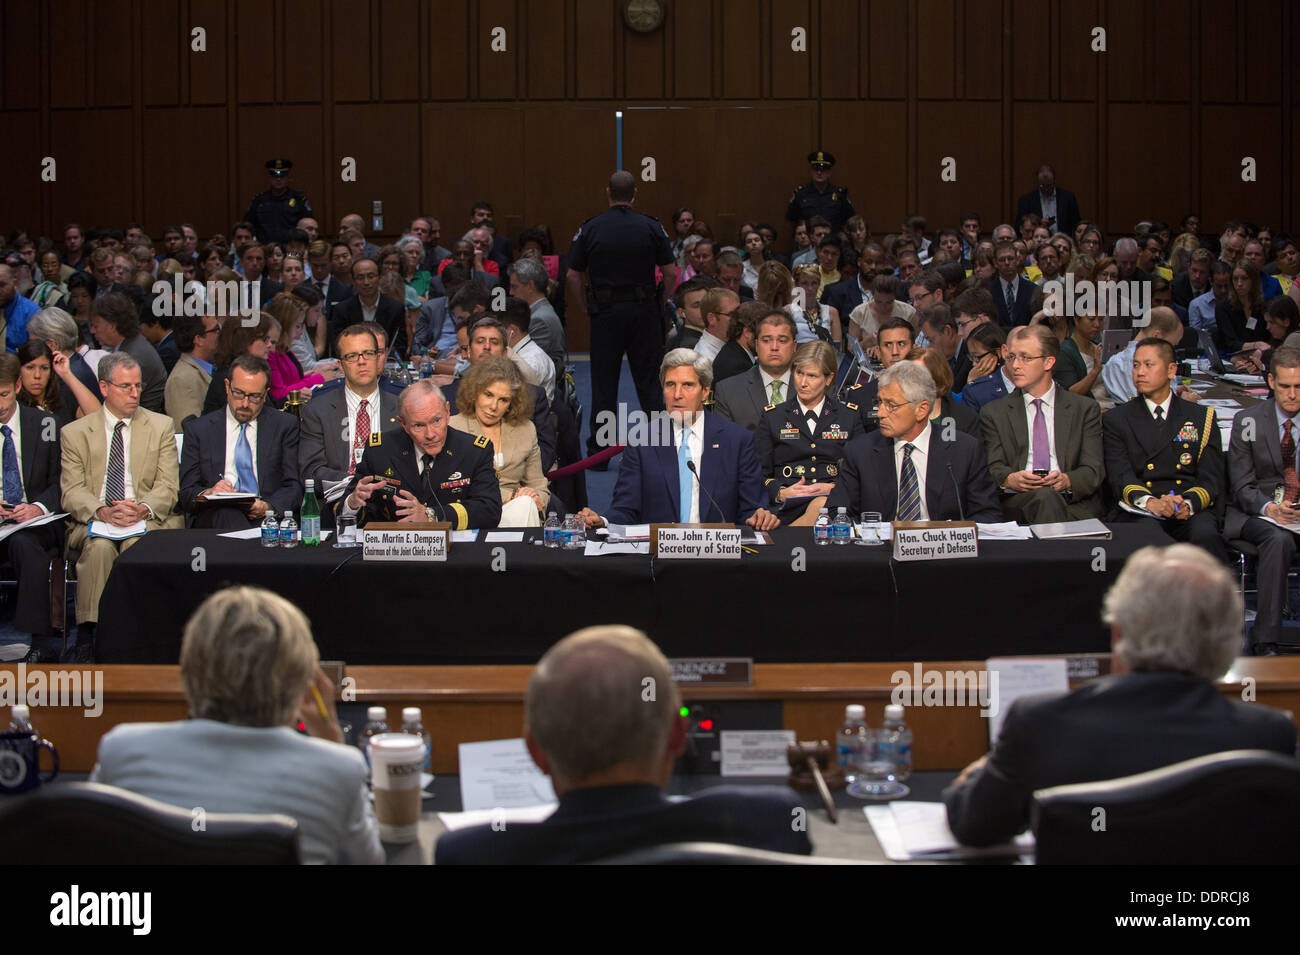 Chairman of the Joint Chiefs of Staff Martin E. Dempsey speaks along with Secretary of State John Kerry and Secretary of Defense Chuck Hagel during a Senate Foreign Relations Committee hearing at the Hart Senate Office building in Washington D.C. Sept. 3, Stock Photo